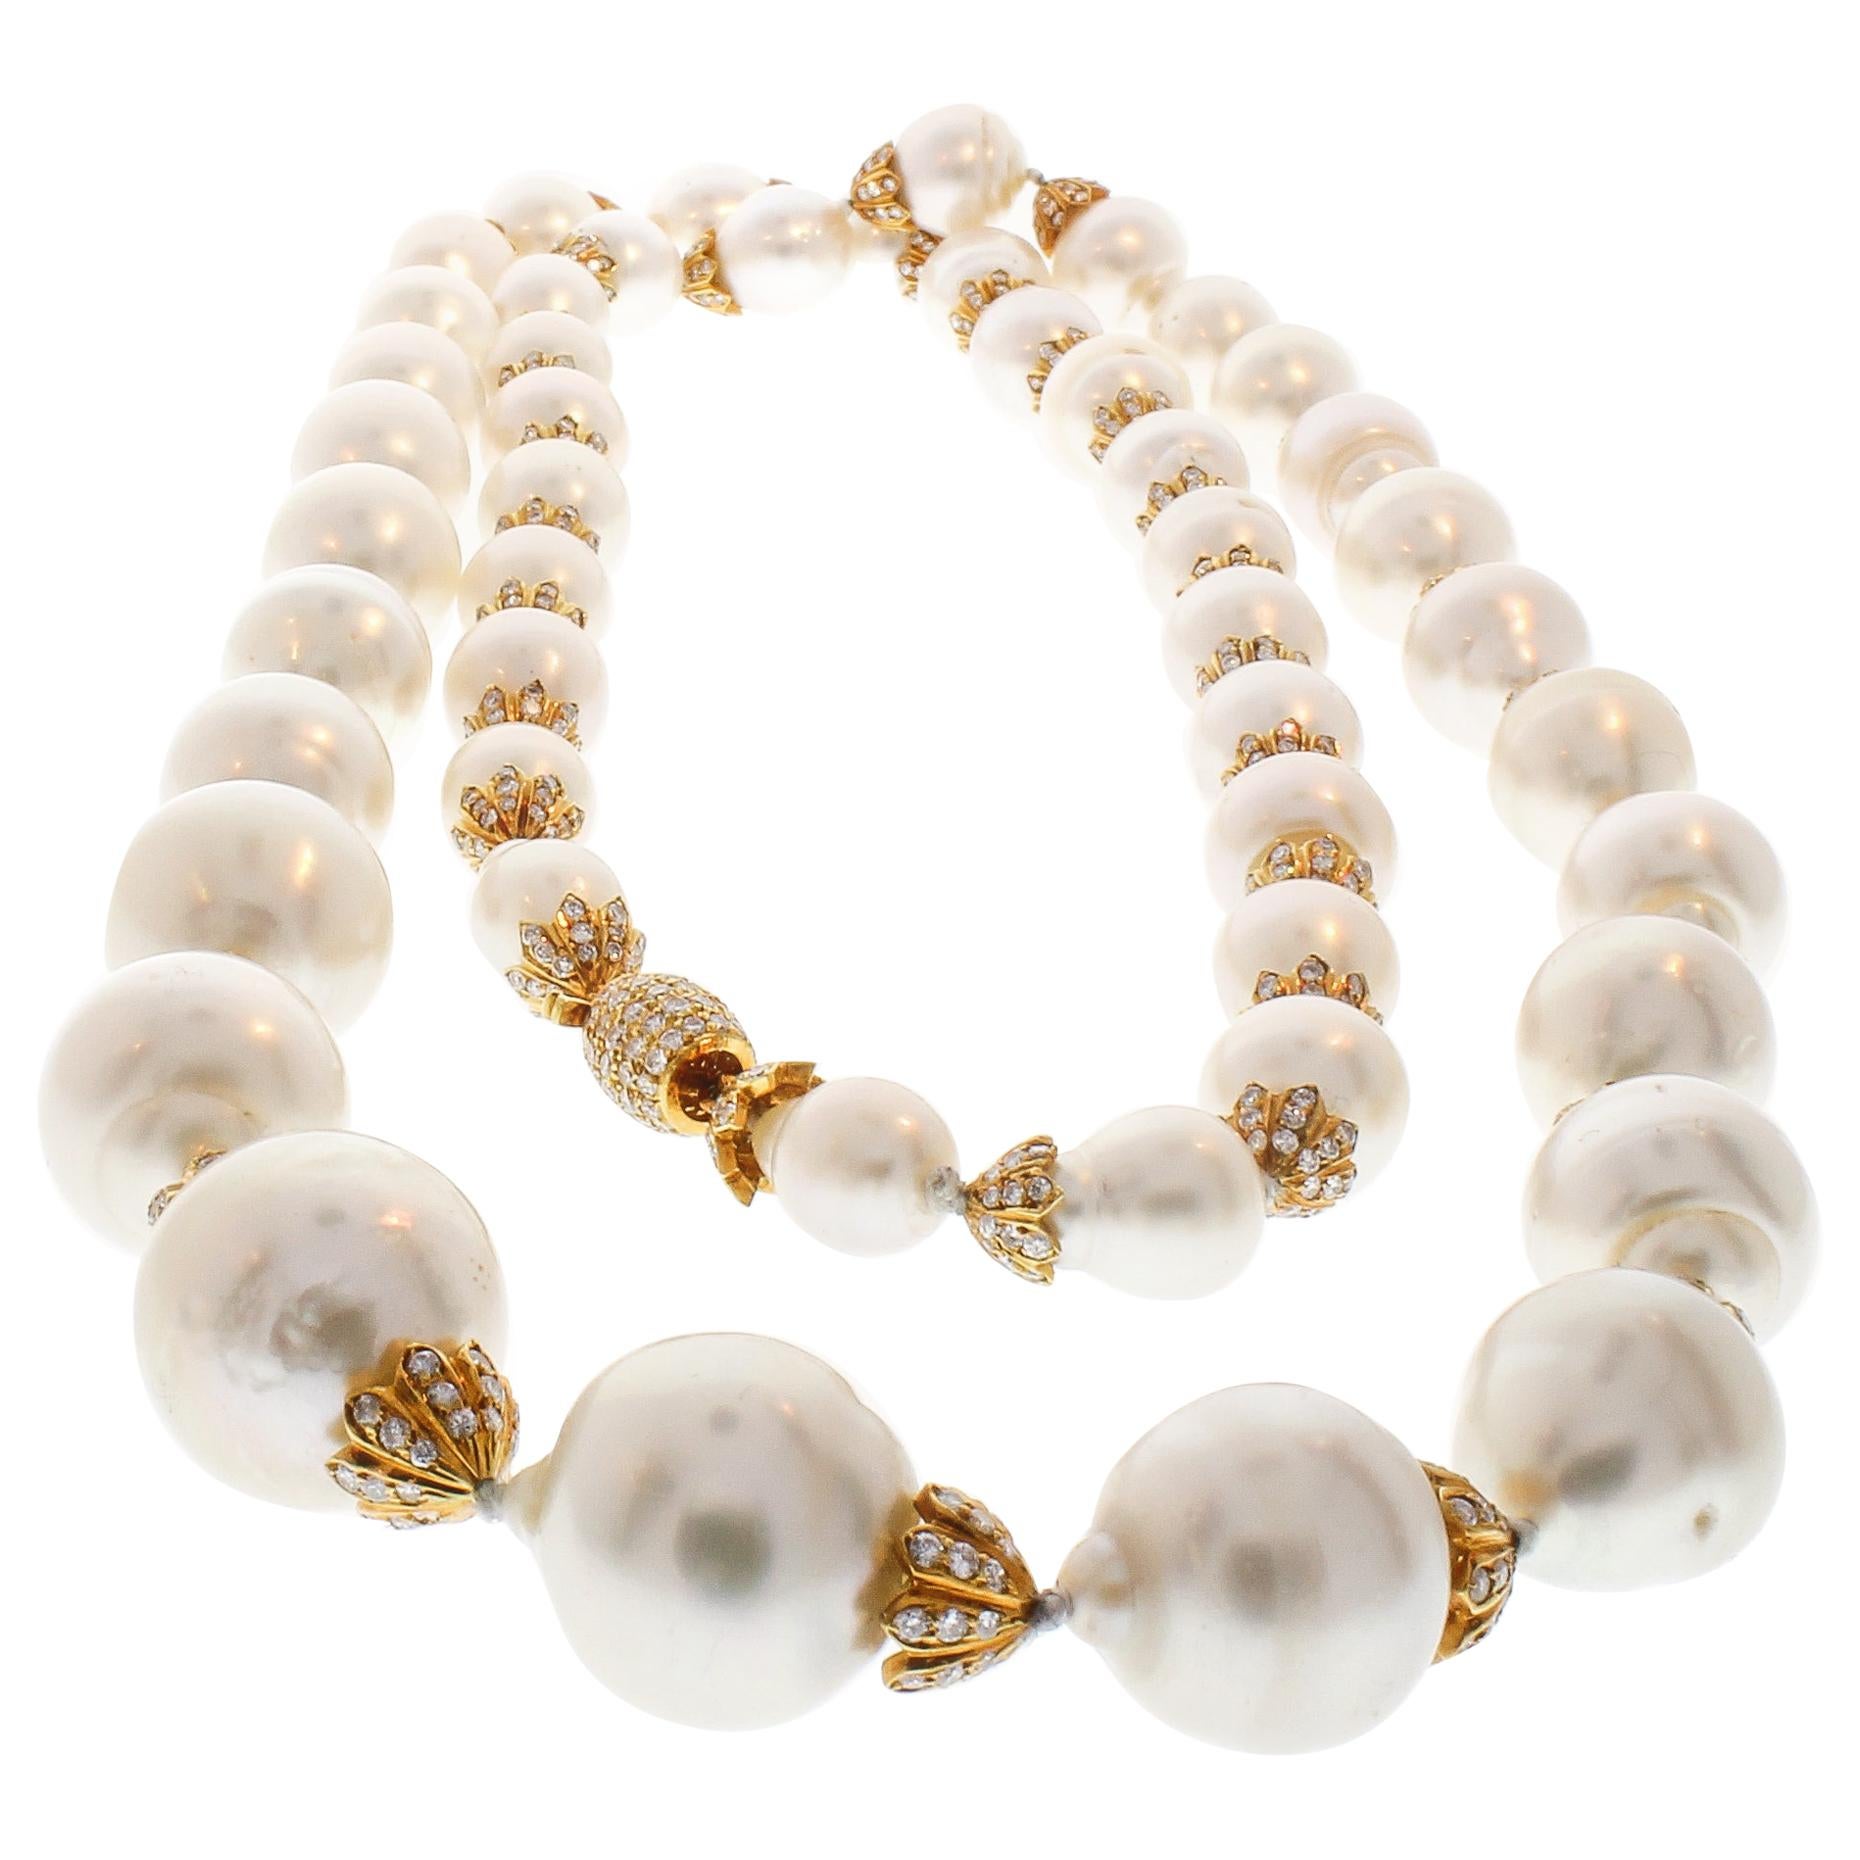 Australian South Sea Pearl and Diamond Necklace with 18 Karat White Gold Clasp